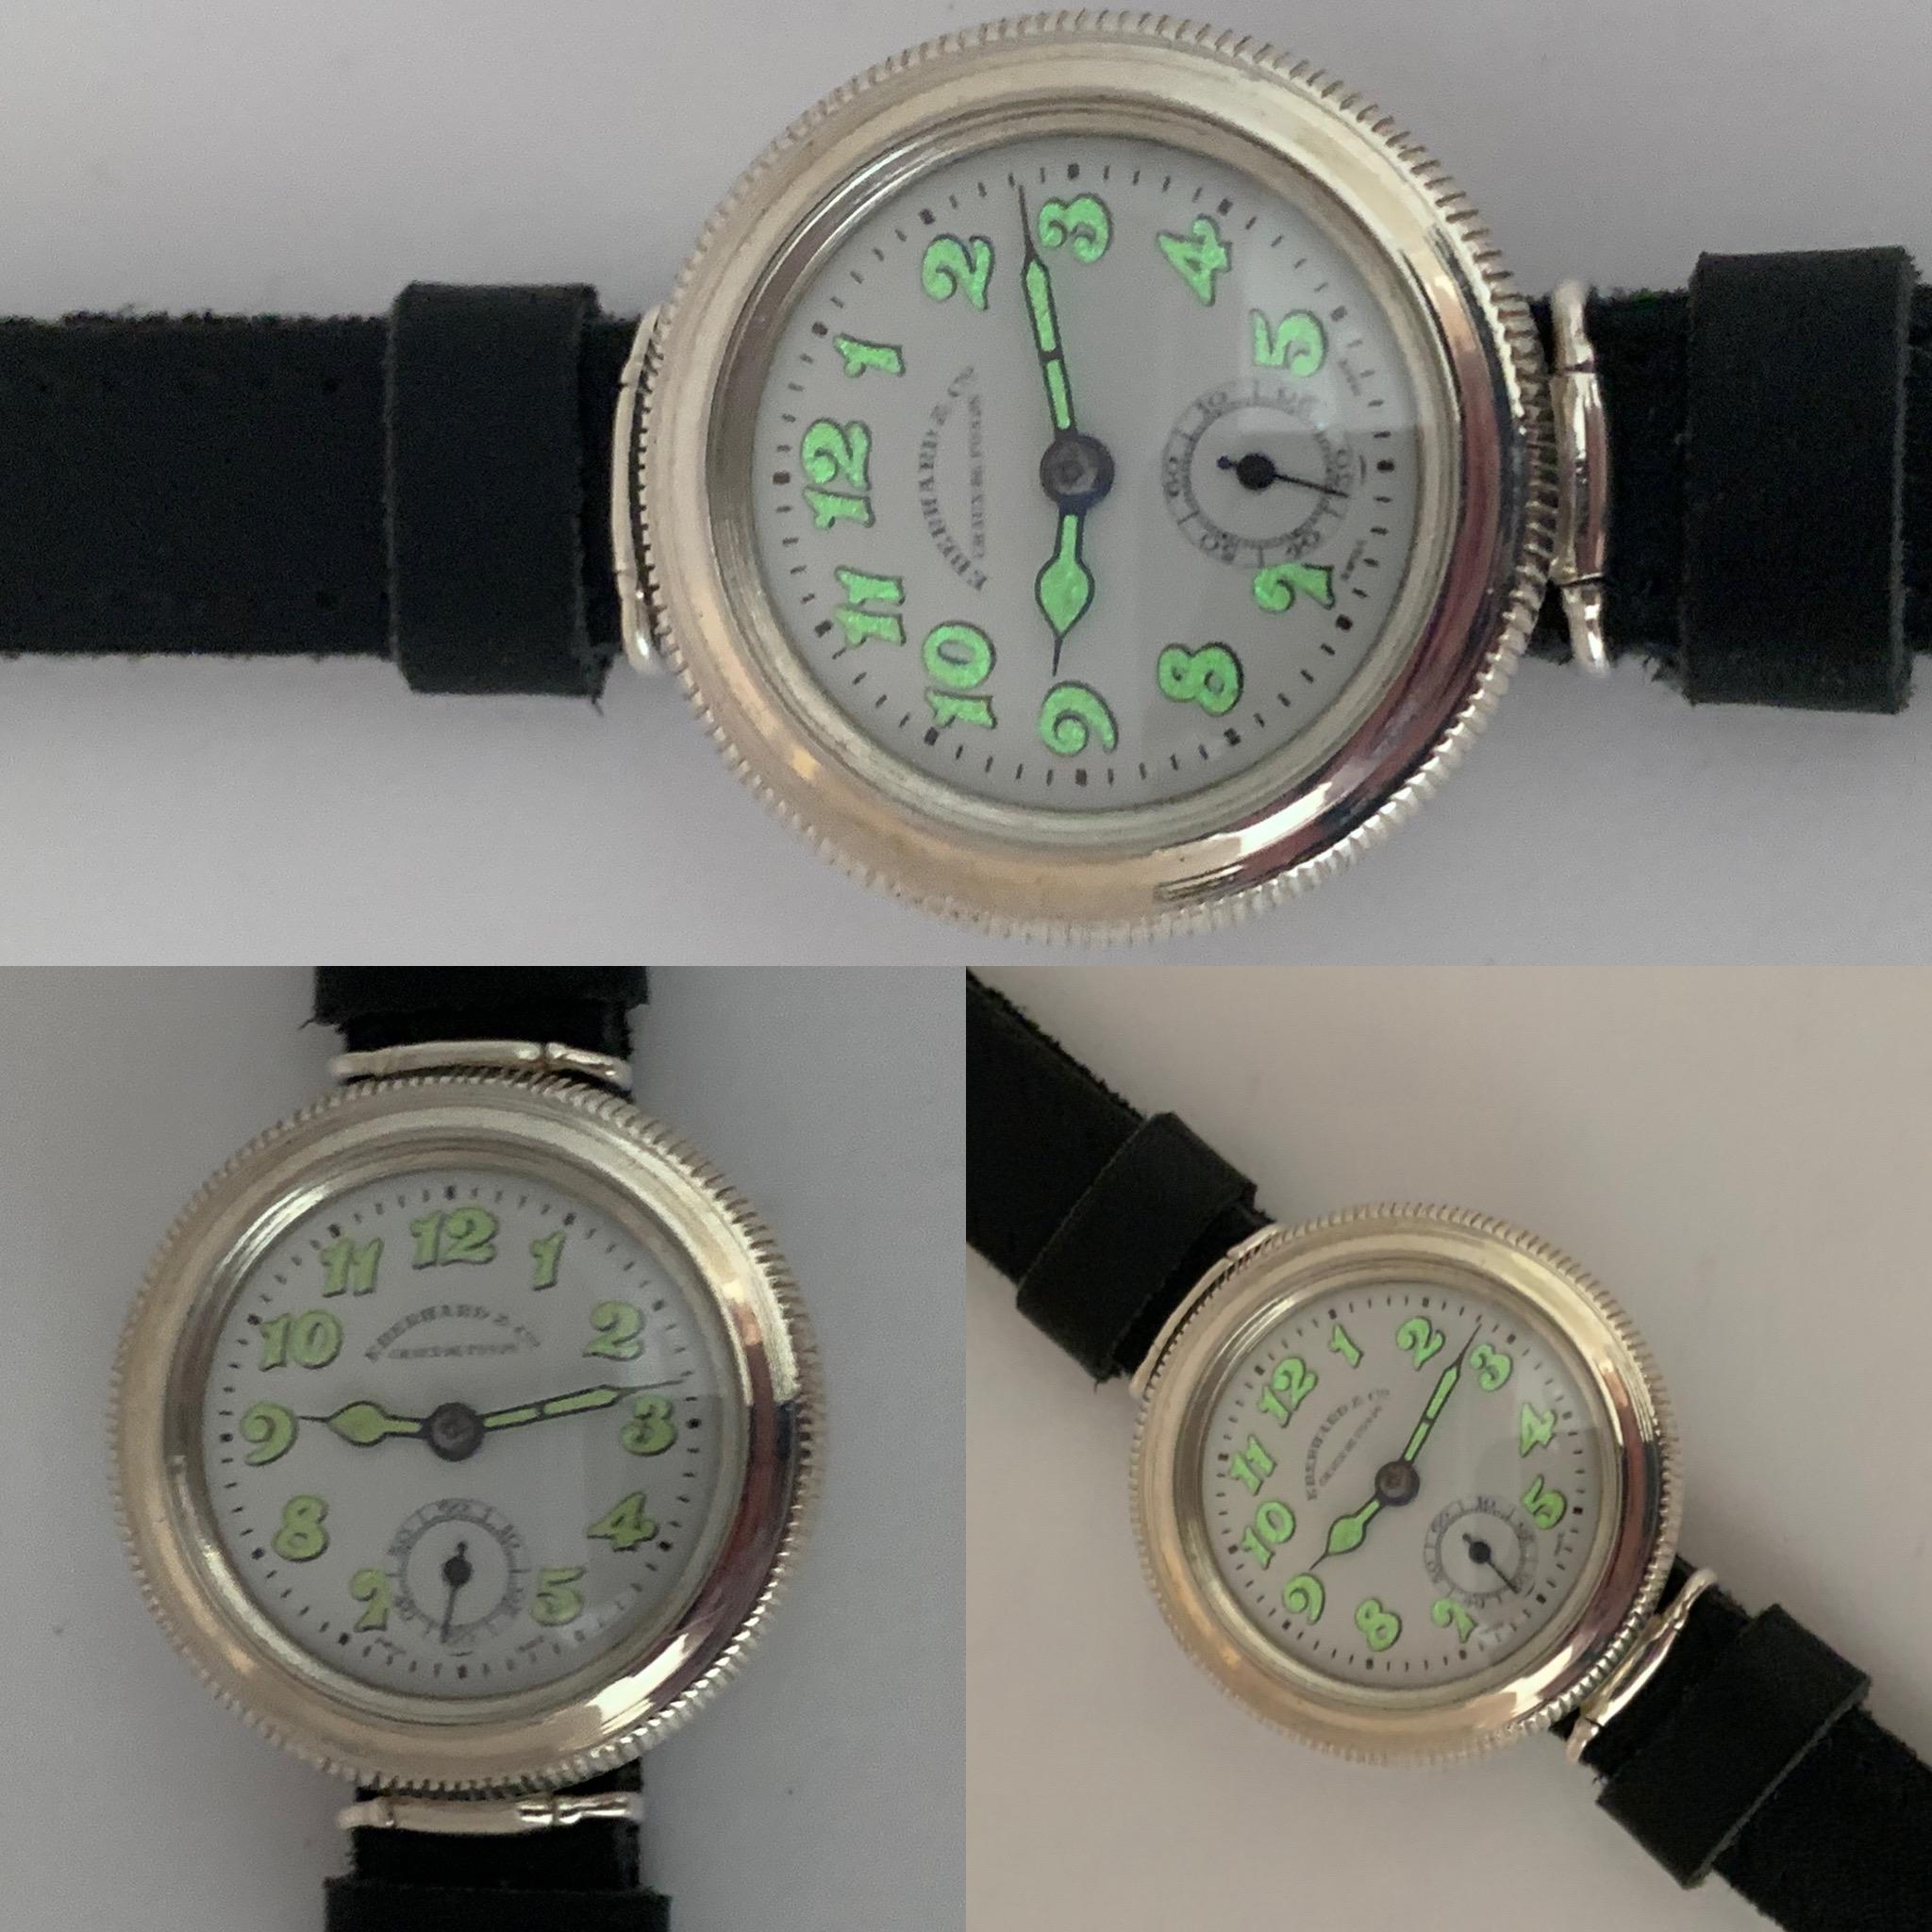 My shop was recently selected to supply vintage American watches for a premier movie starring some major actors and a world famous director. They were looking for authentic watches that would represent the time period from 1915-1926. It is a true